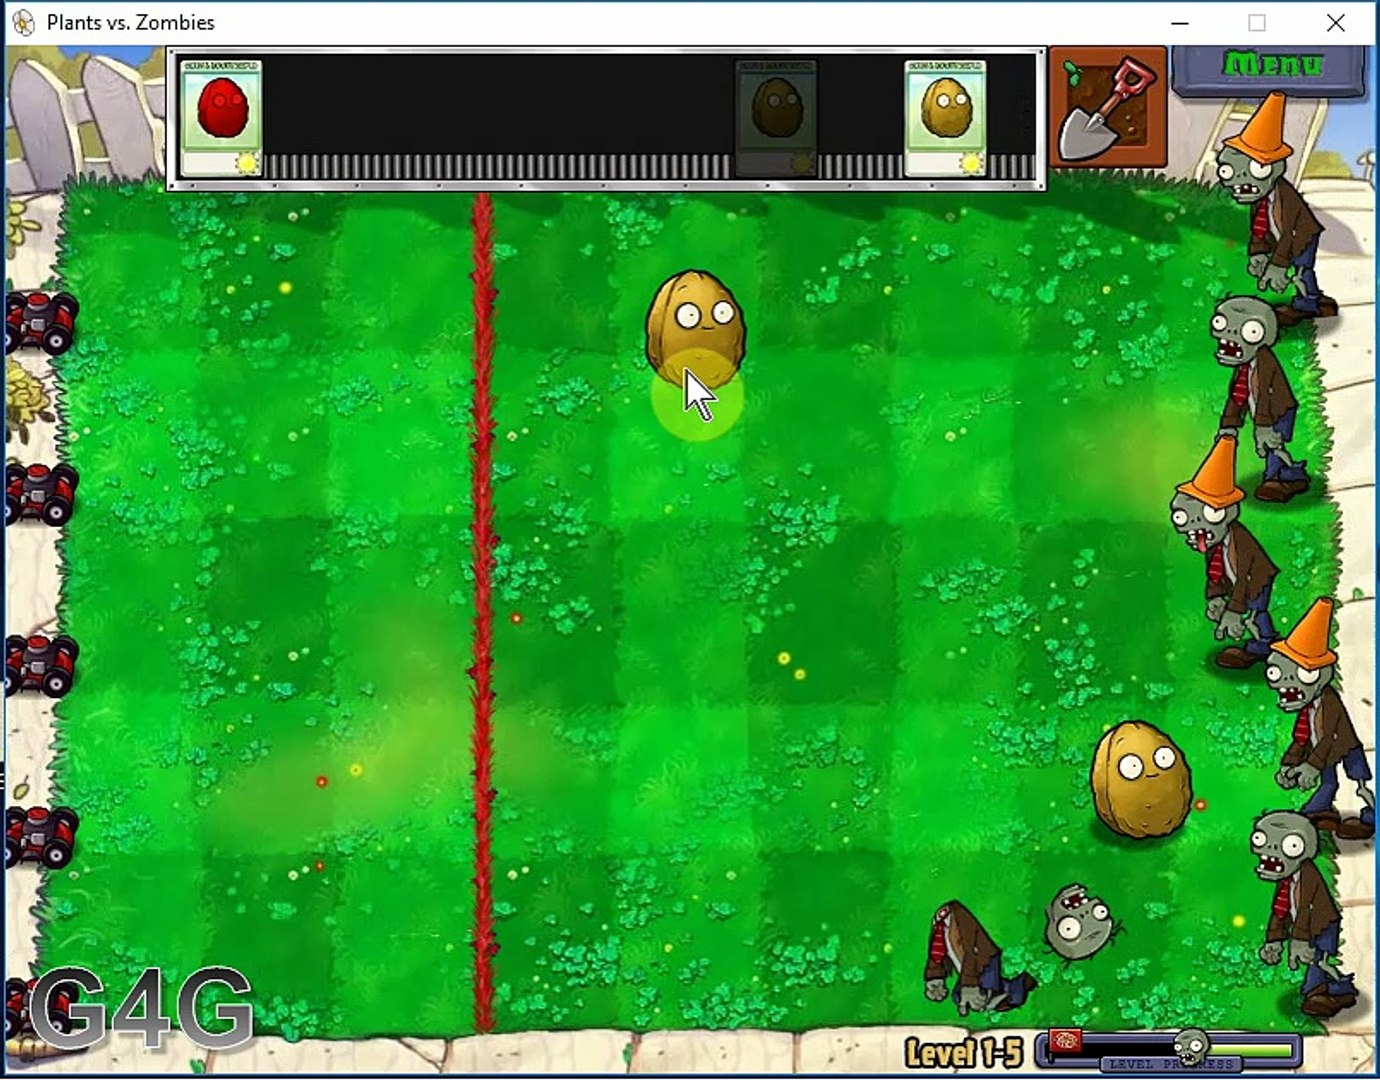 A Good Guide on How to Mod PvZ 1 [Plants vs. Zombies] [Tutorials]